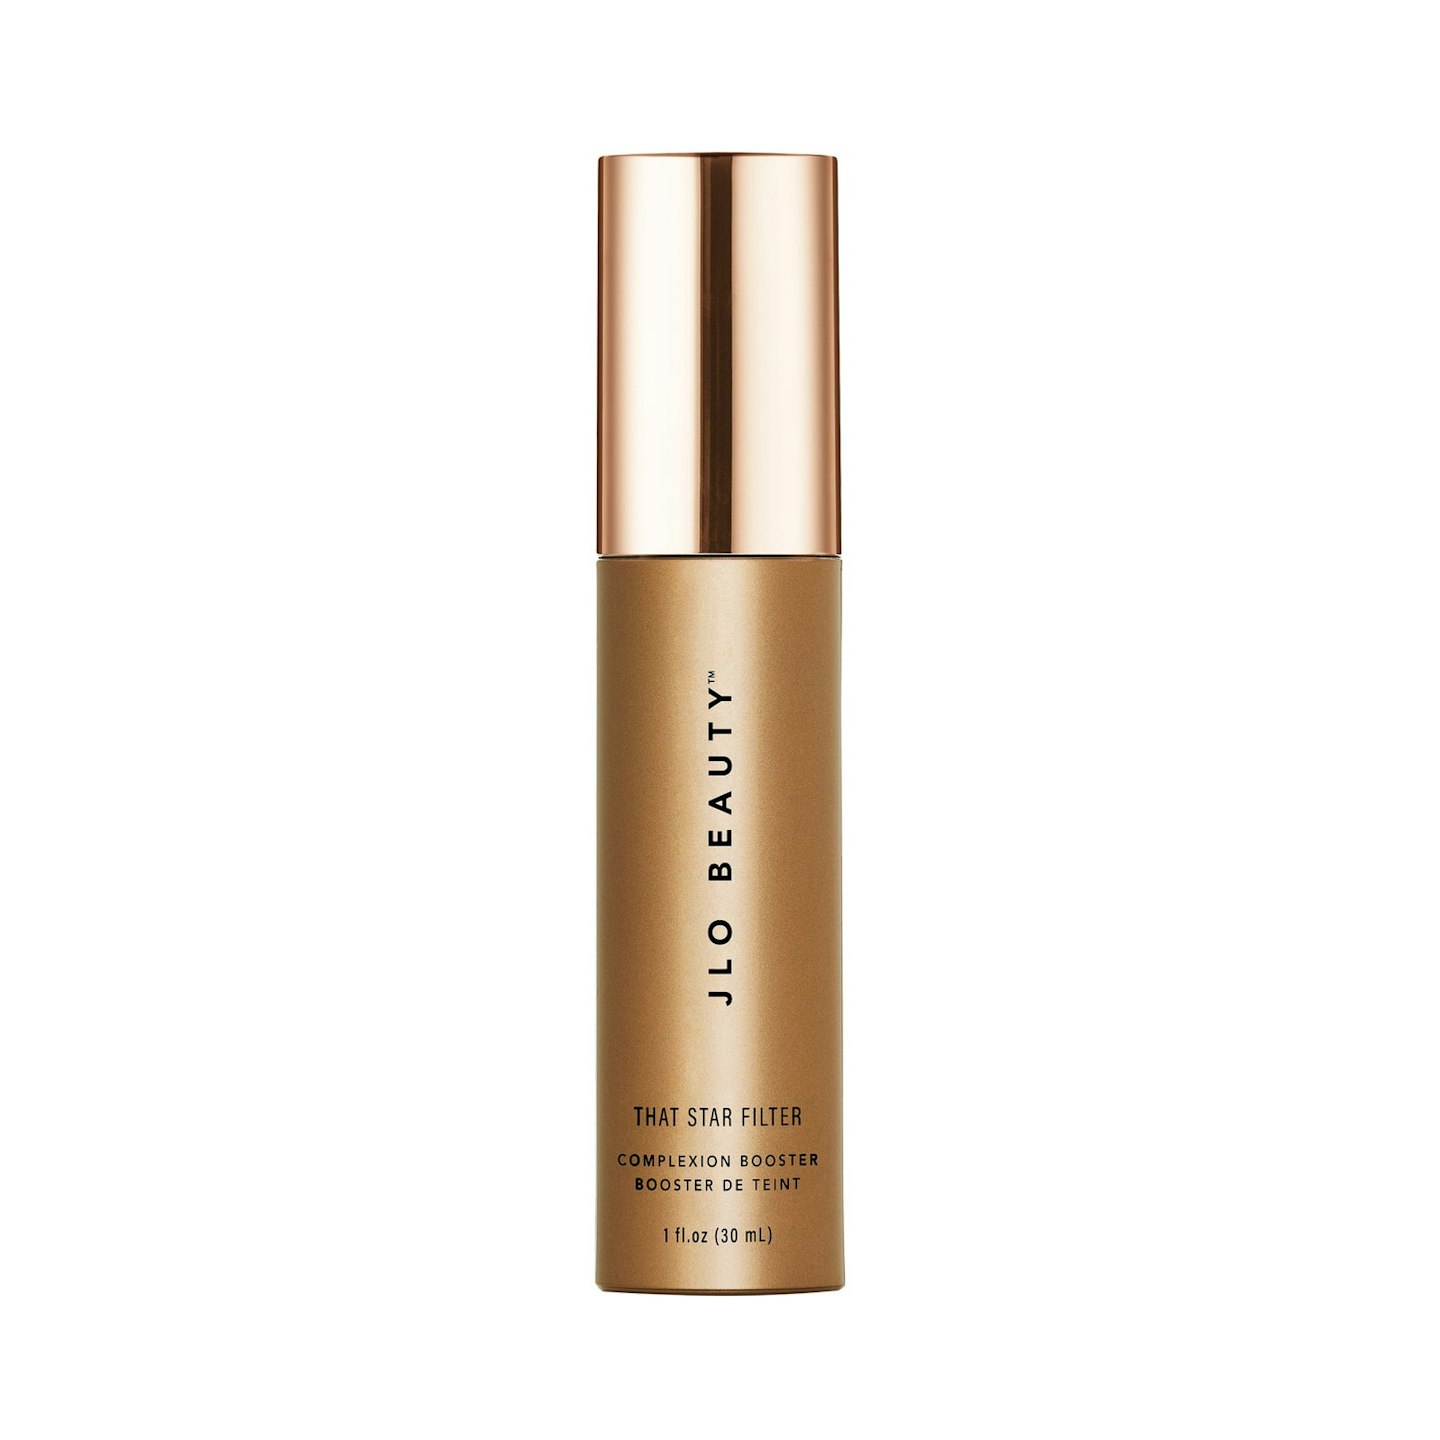 JLo Beauty That Star Filter Complexion Booster,